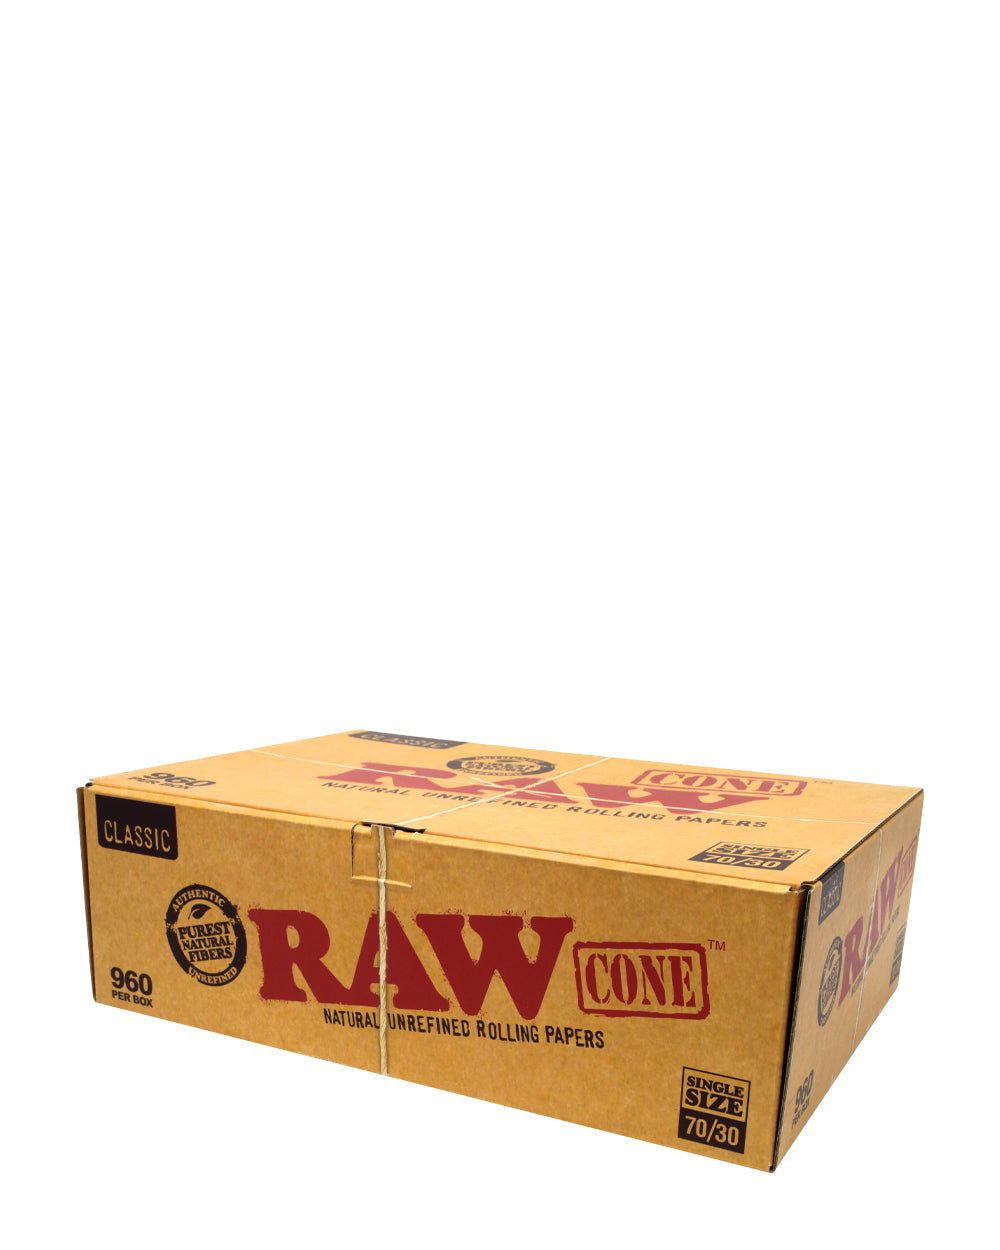 RAW | Classic Single Size Pre-Rolled Cones | 70mm - Unbleached Paper - 960 Count - 1